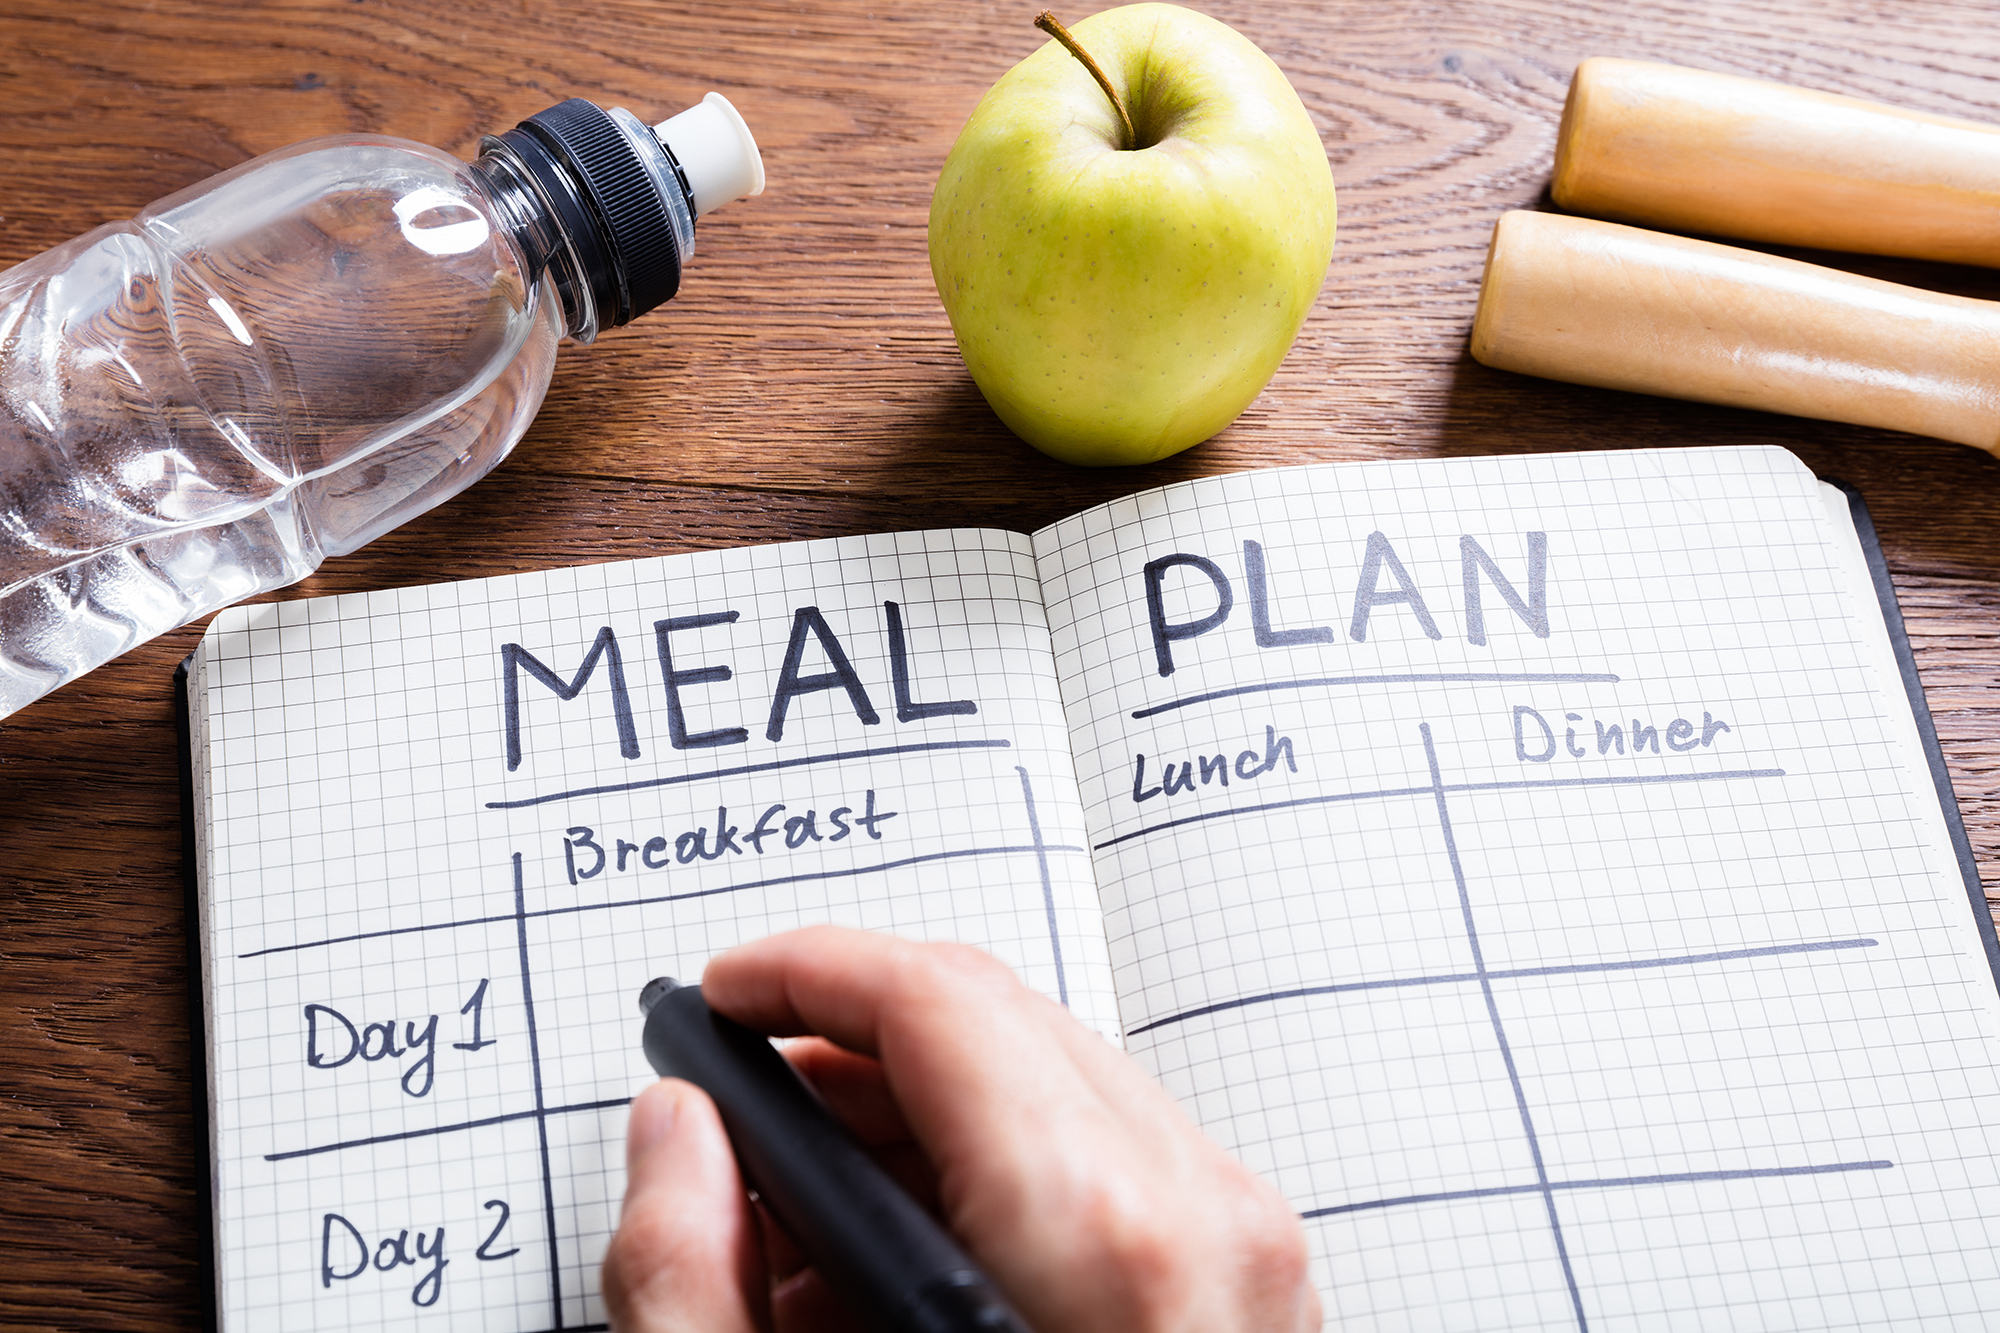 Meal planning book. (Image: Shutterstock)